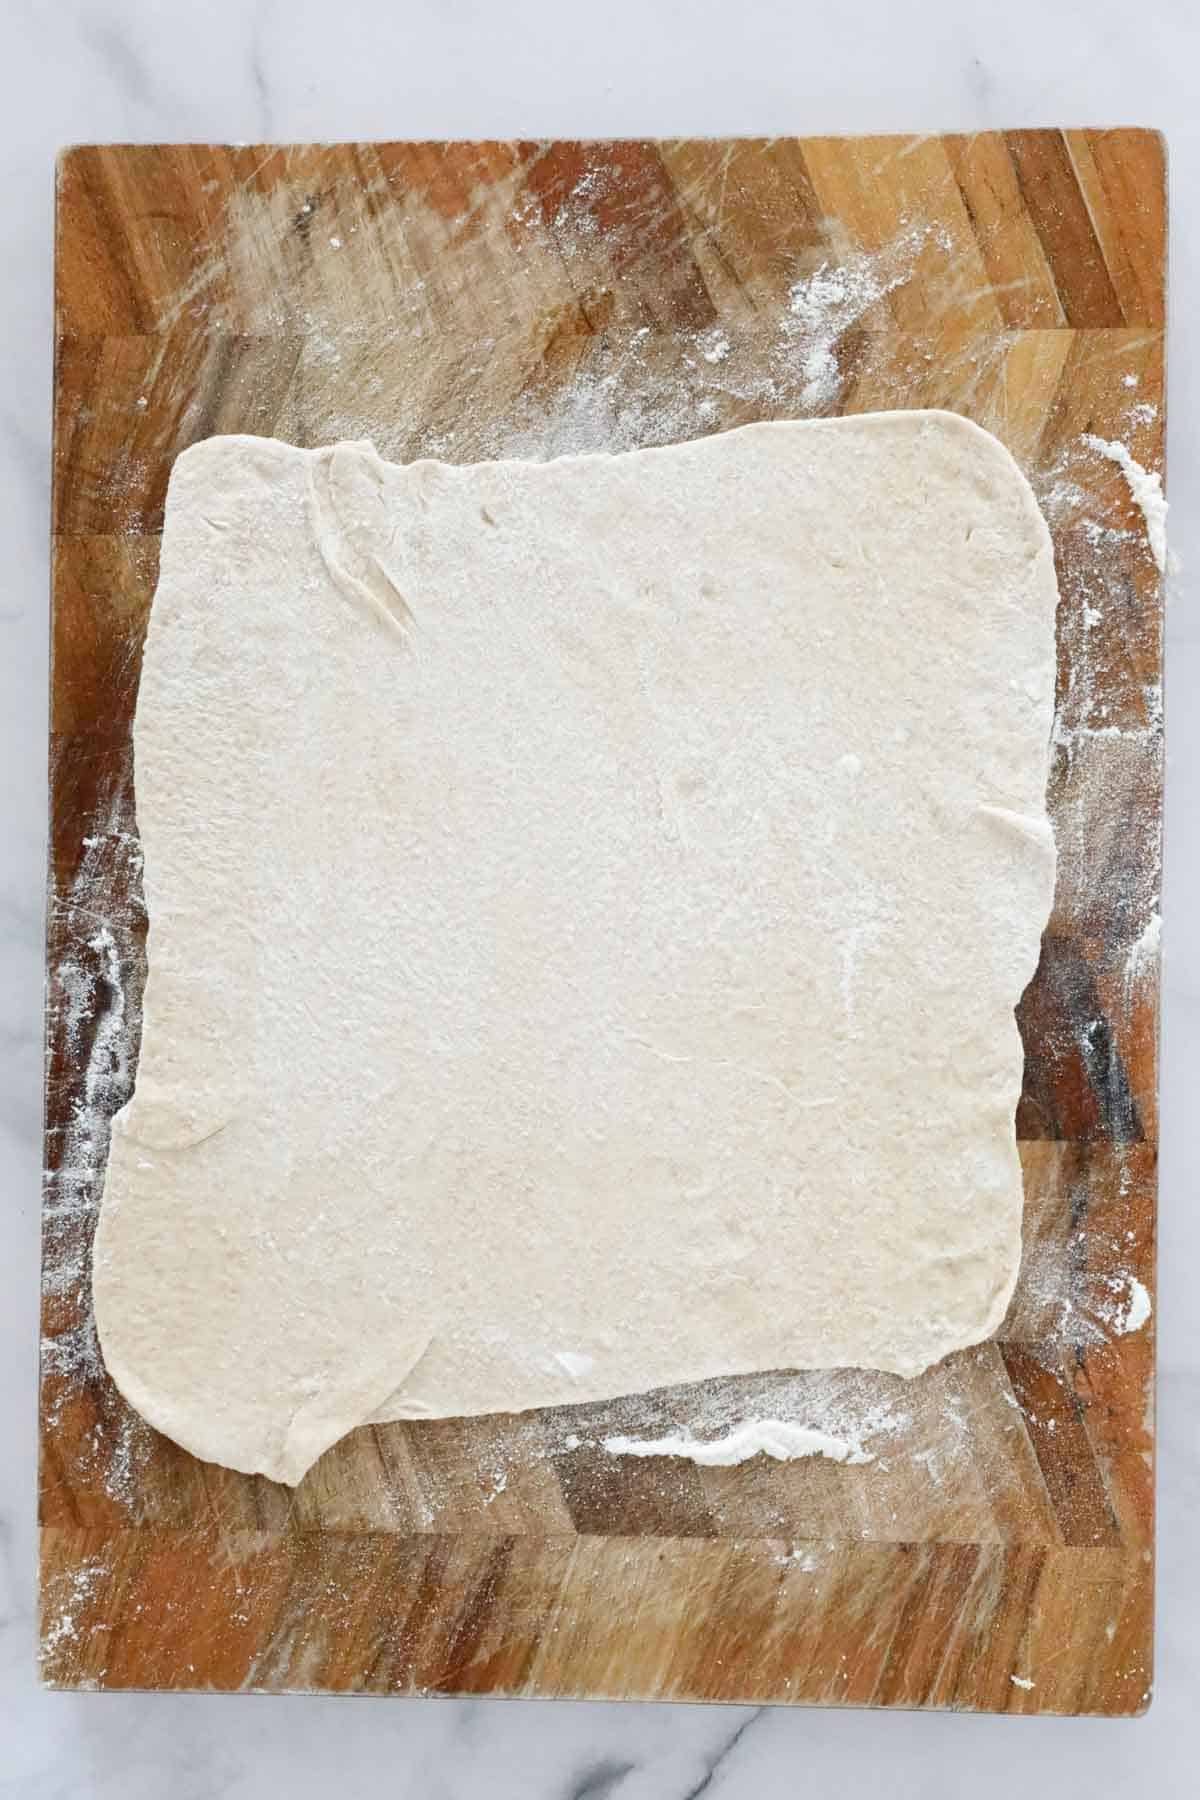 Gozleme dough rolled out thinly on a board.